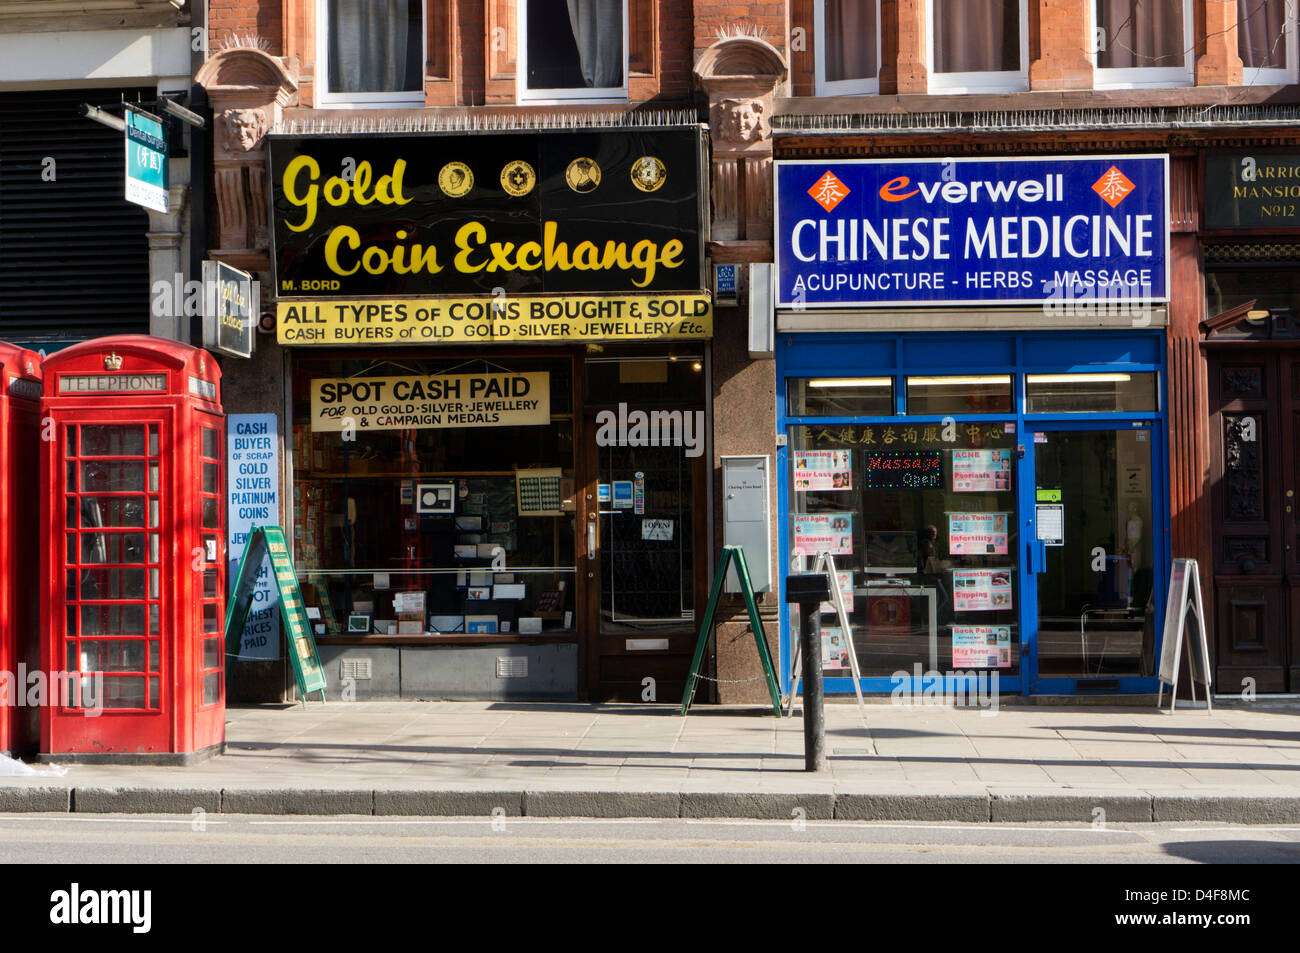 Gold Coin Exchange and Chinese Medicine premises in Charing Cross Road, London. Stock Photo